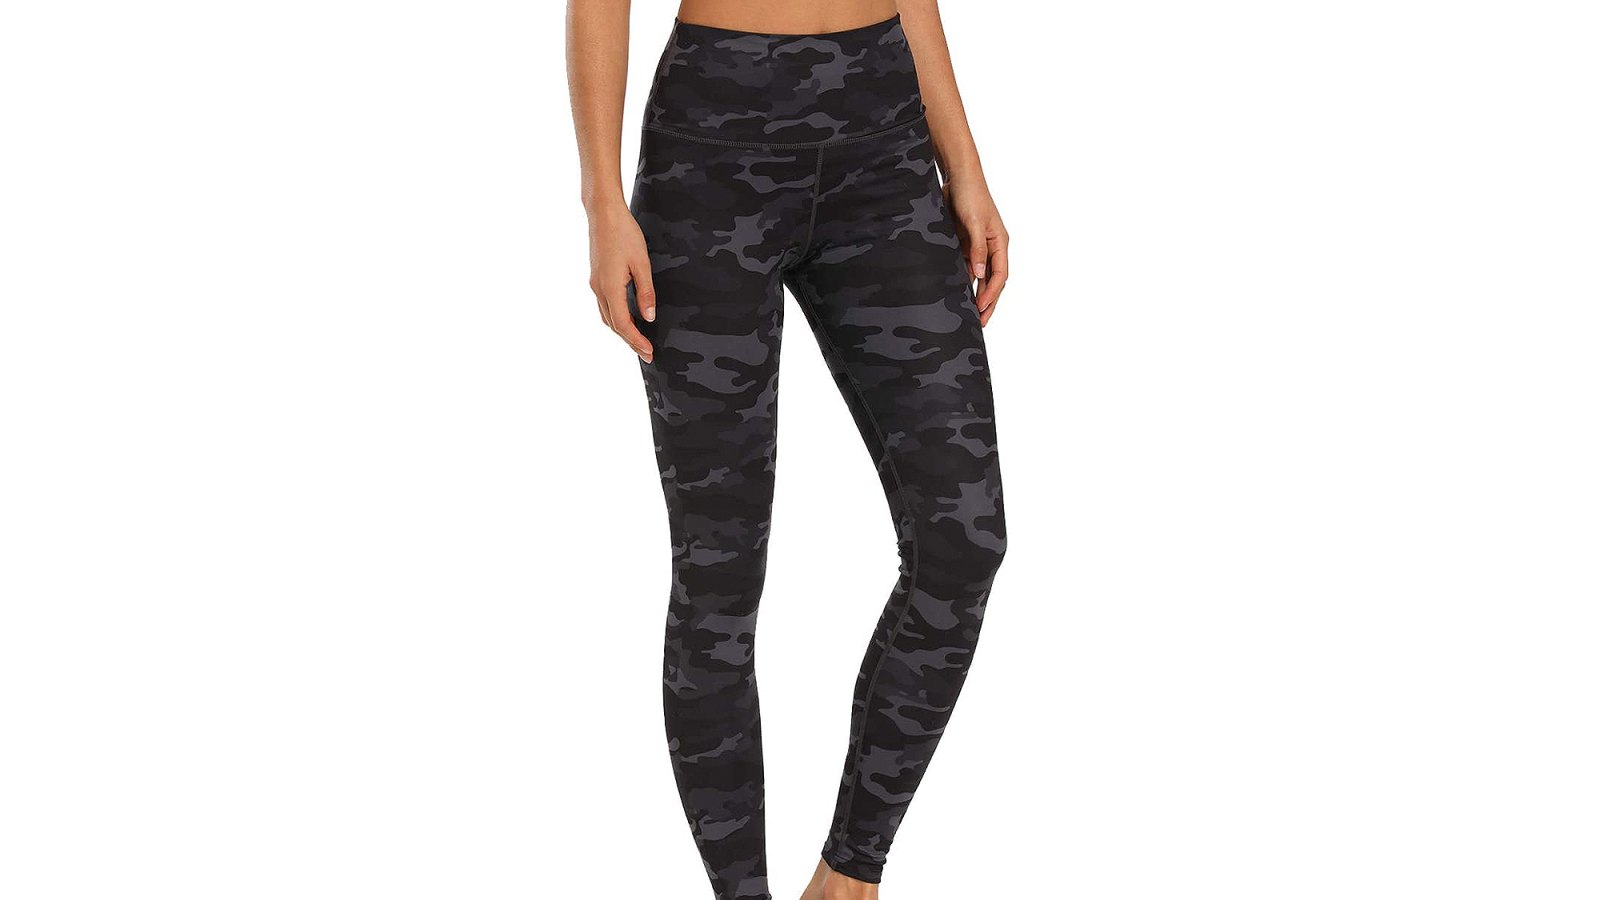 https://www.usmagazine.com/wp-content/uploads/2021/01/Houmous-Womens-Buttery-Soft-Printed-Leggings-High-Waisted-Full-Length-Yoga-Pants.jpg?crop=0px%2C0px%2C2000px%2C1131px&resize=1600%2C900&quality=86&strip=all